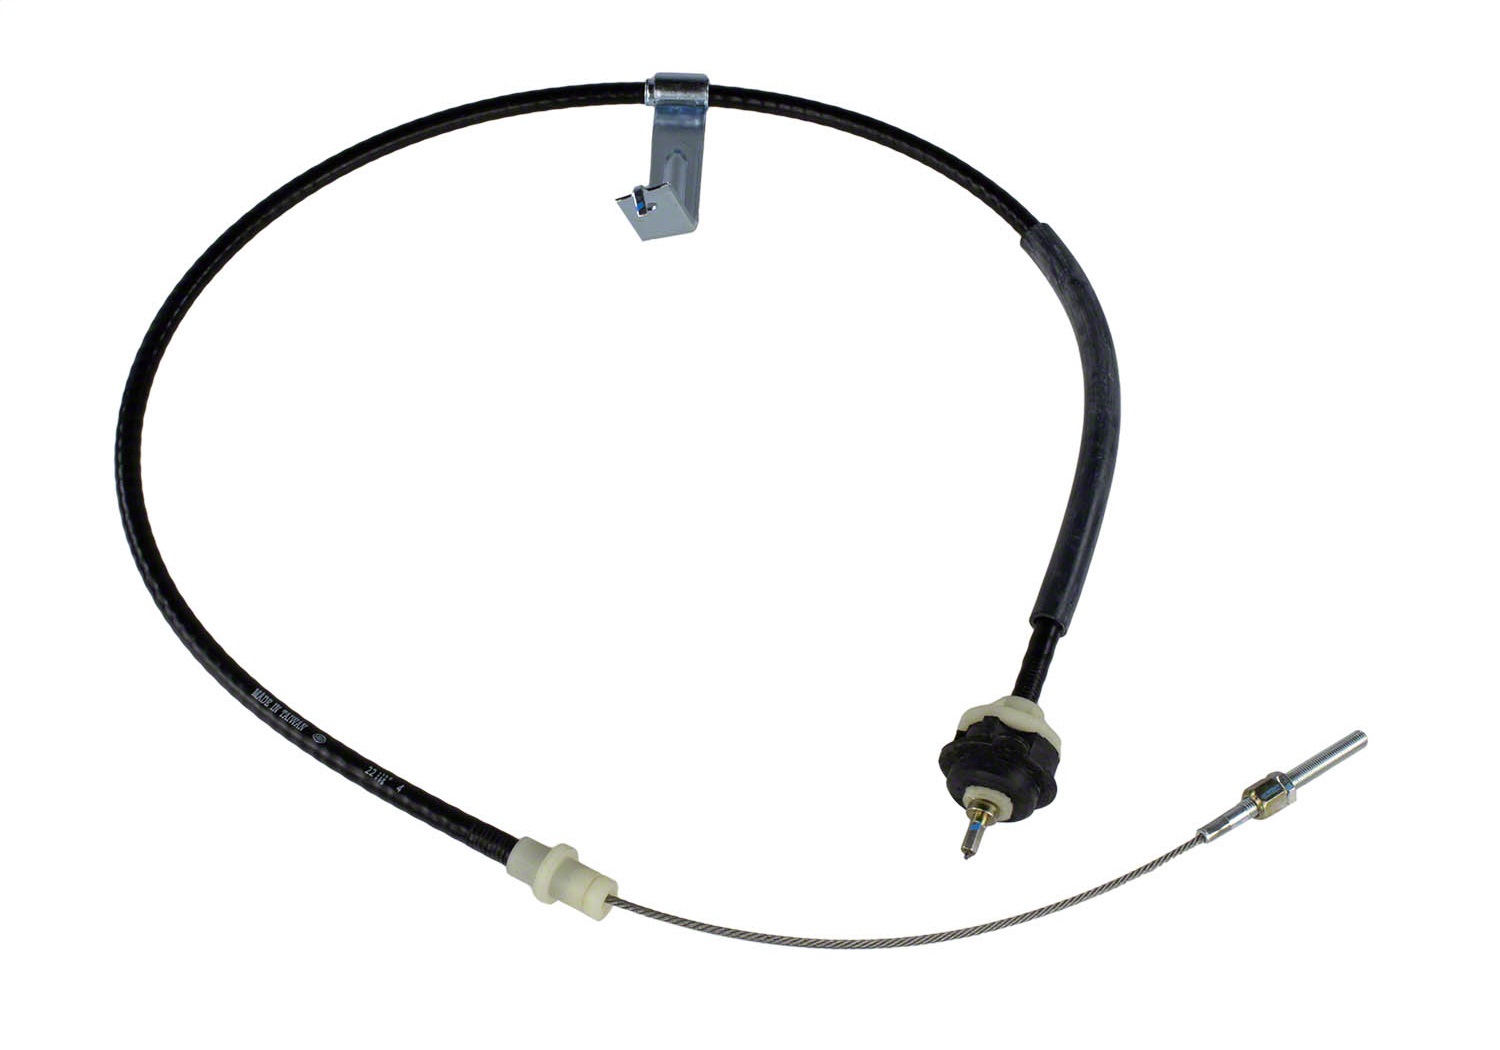 Ford Racing Ford Racing M-7553-C302 Clutch Cable Fits 82-95 Capri Mustang